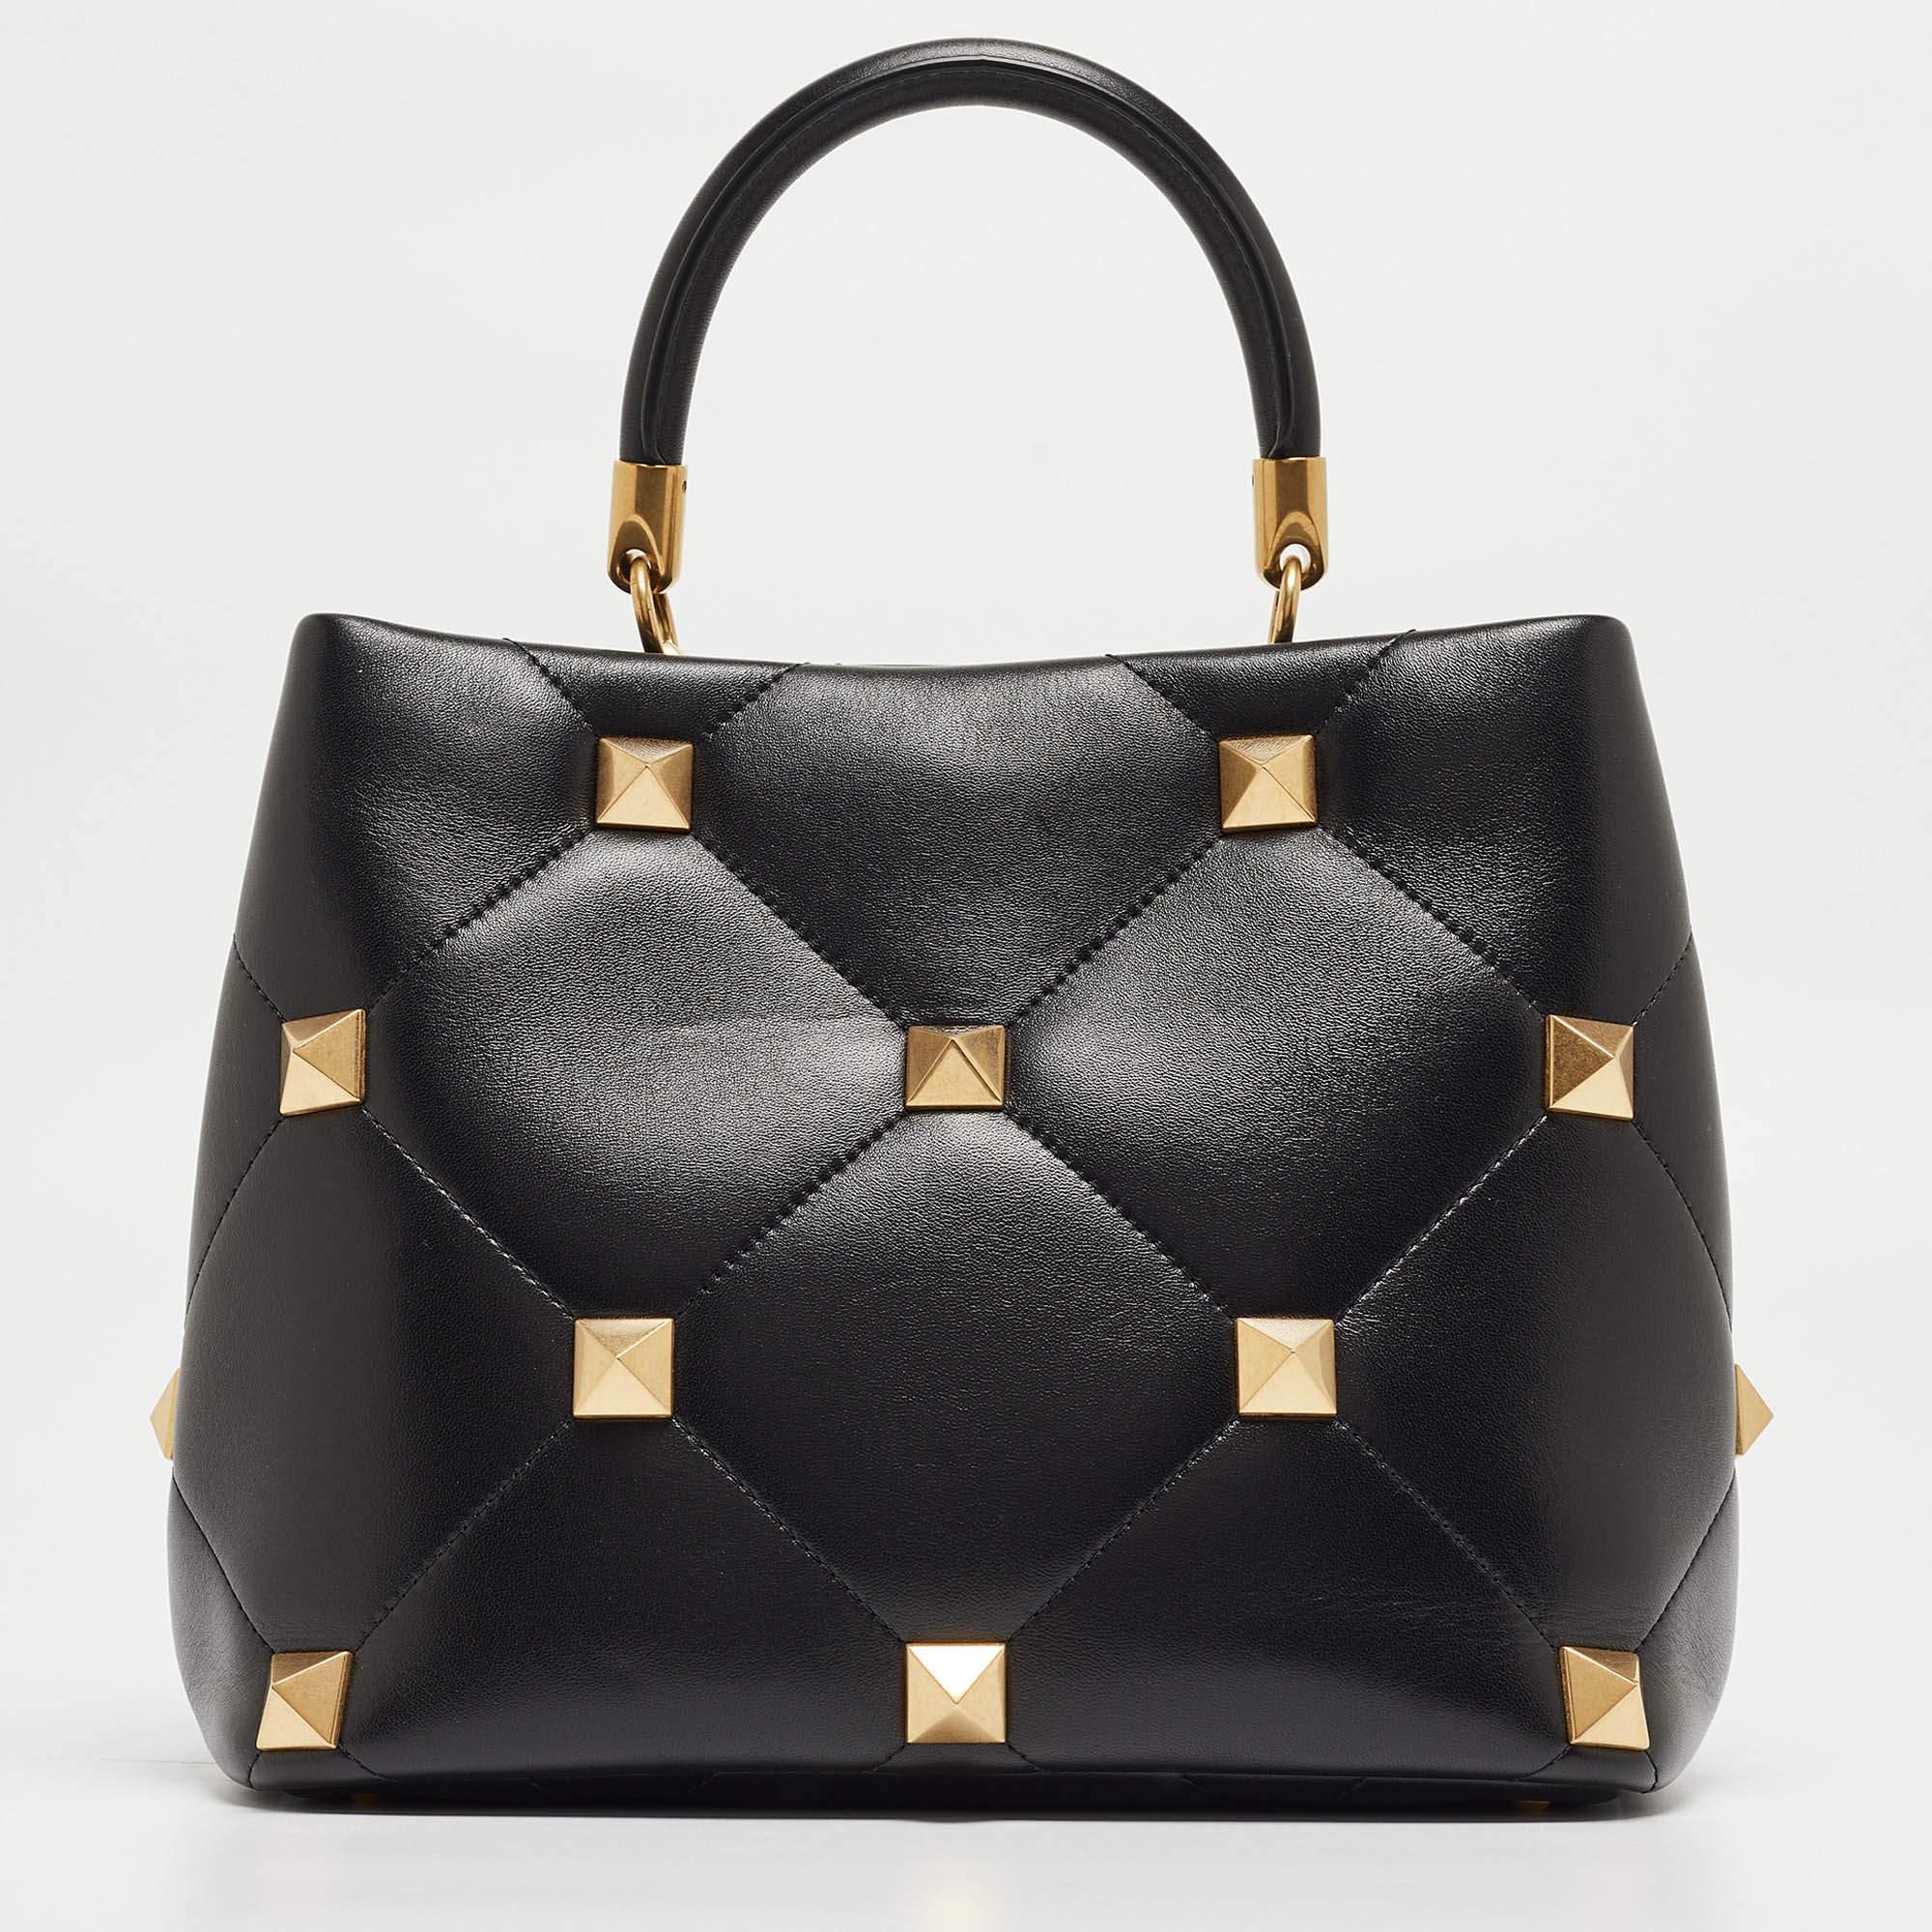 Imbued with timeless allure, the Valentino Roman Stud Top Handle Bag epitomizes refinement. Crafted from supple leather, its quilted design exudes sophistication. Adorned with gleaming Roman studs, it blends classic elegance with modern edge, making